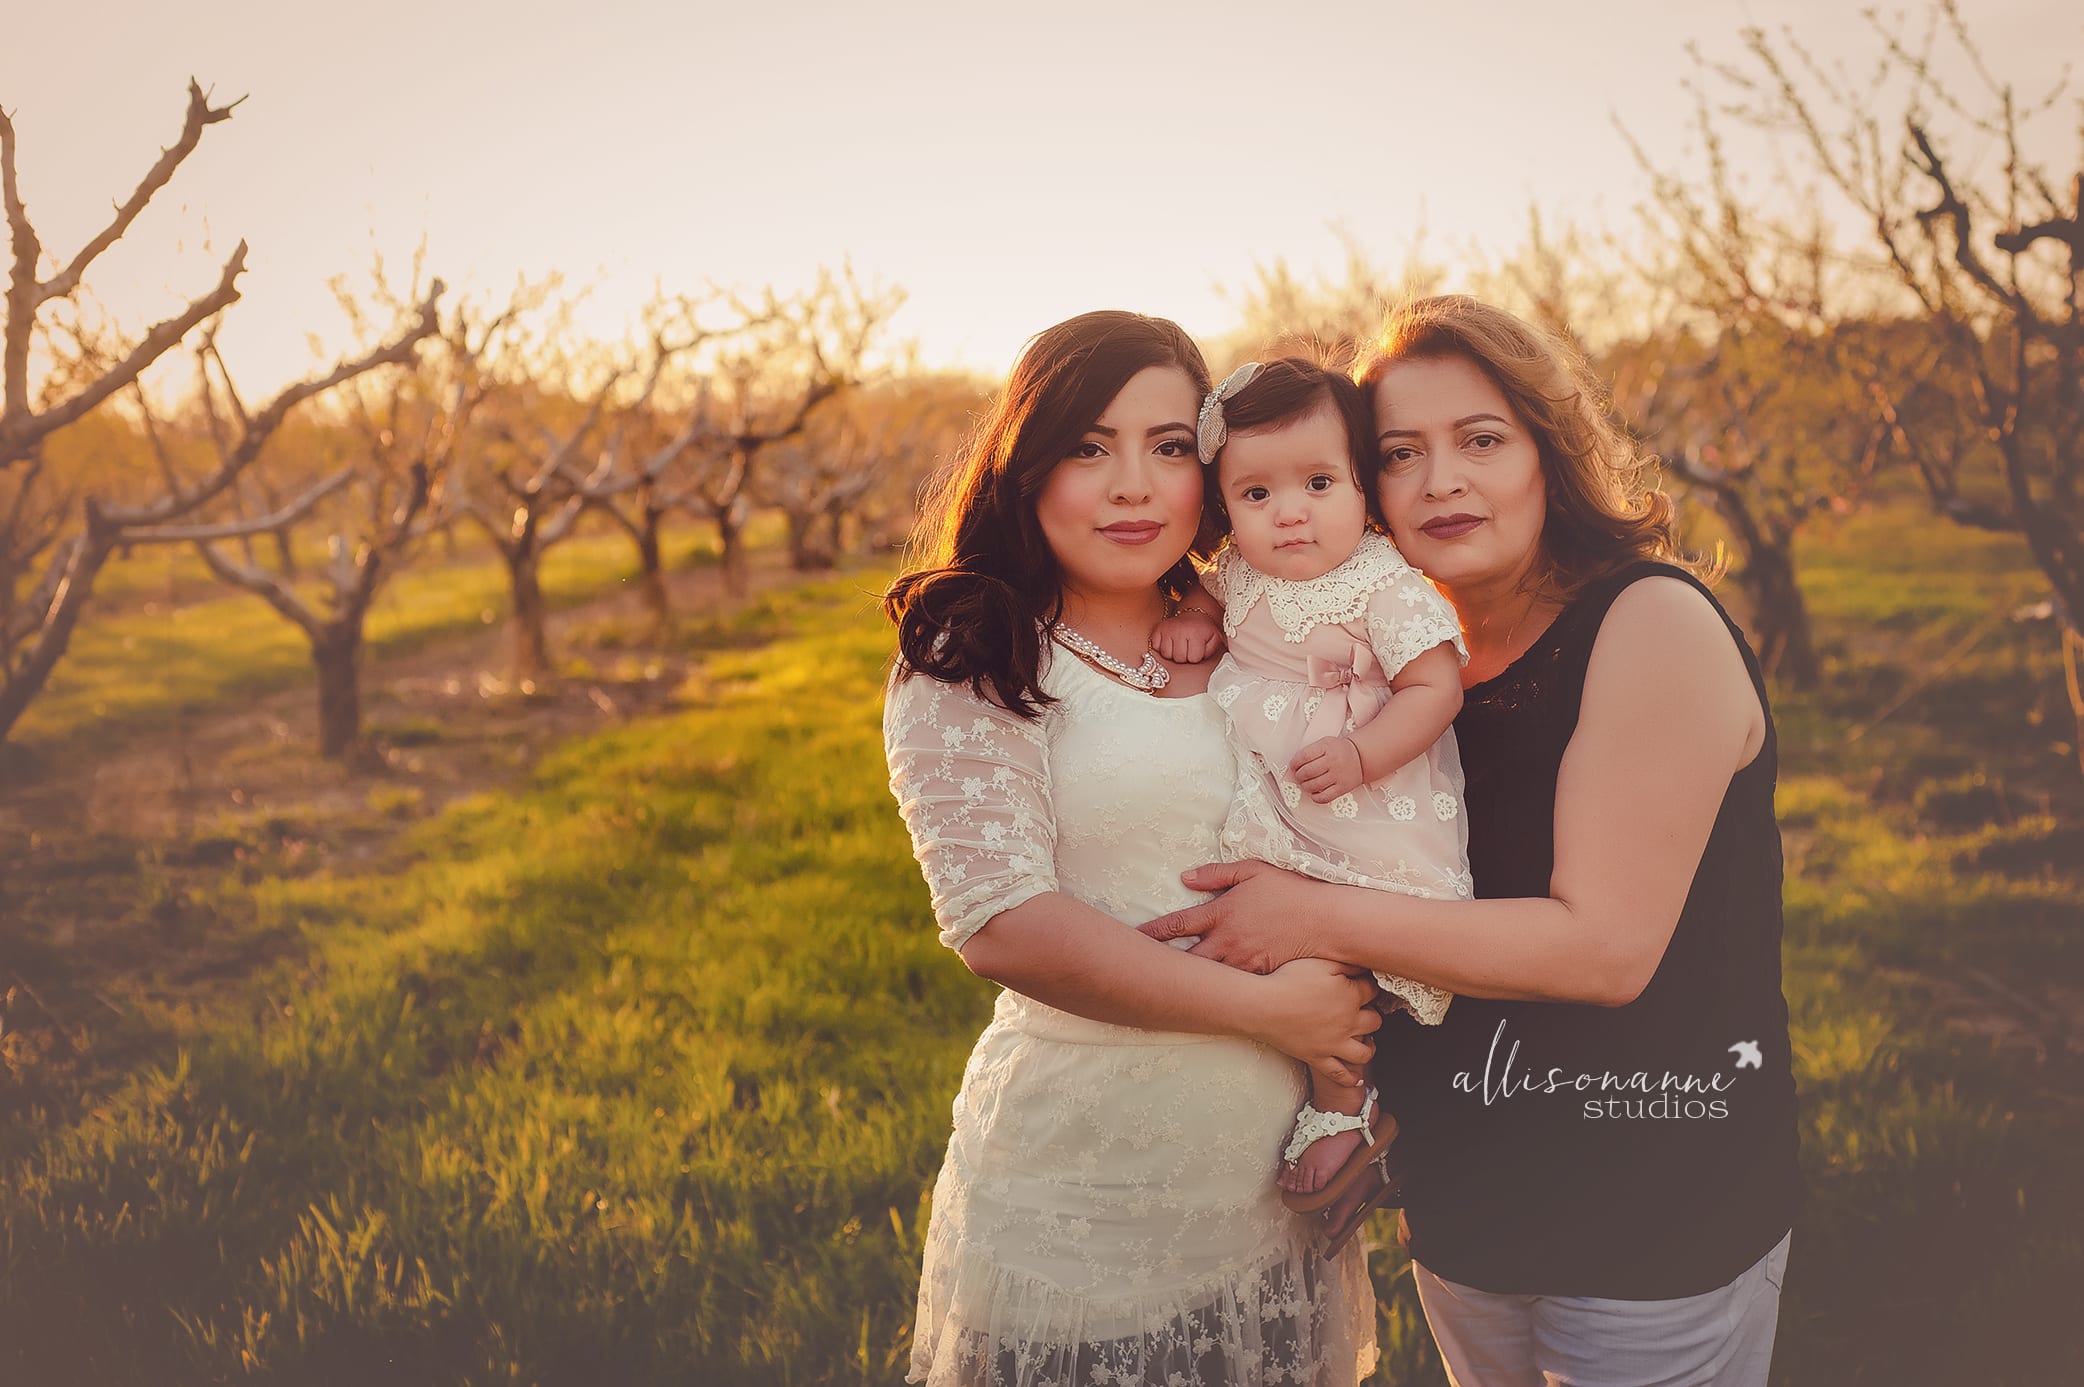 Mother's Day, generations, family bonds, A mother's love, mothers day mini sessions, love, AllisonAnne Studios, Allison Gallagher, Hammonton, Peach fields, mother daughter portraits, returning clients